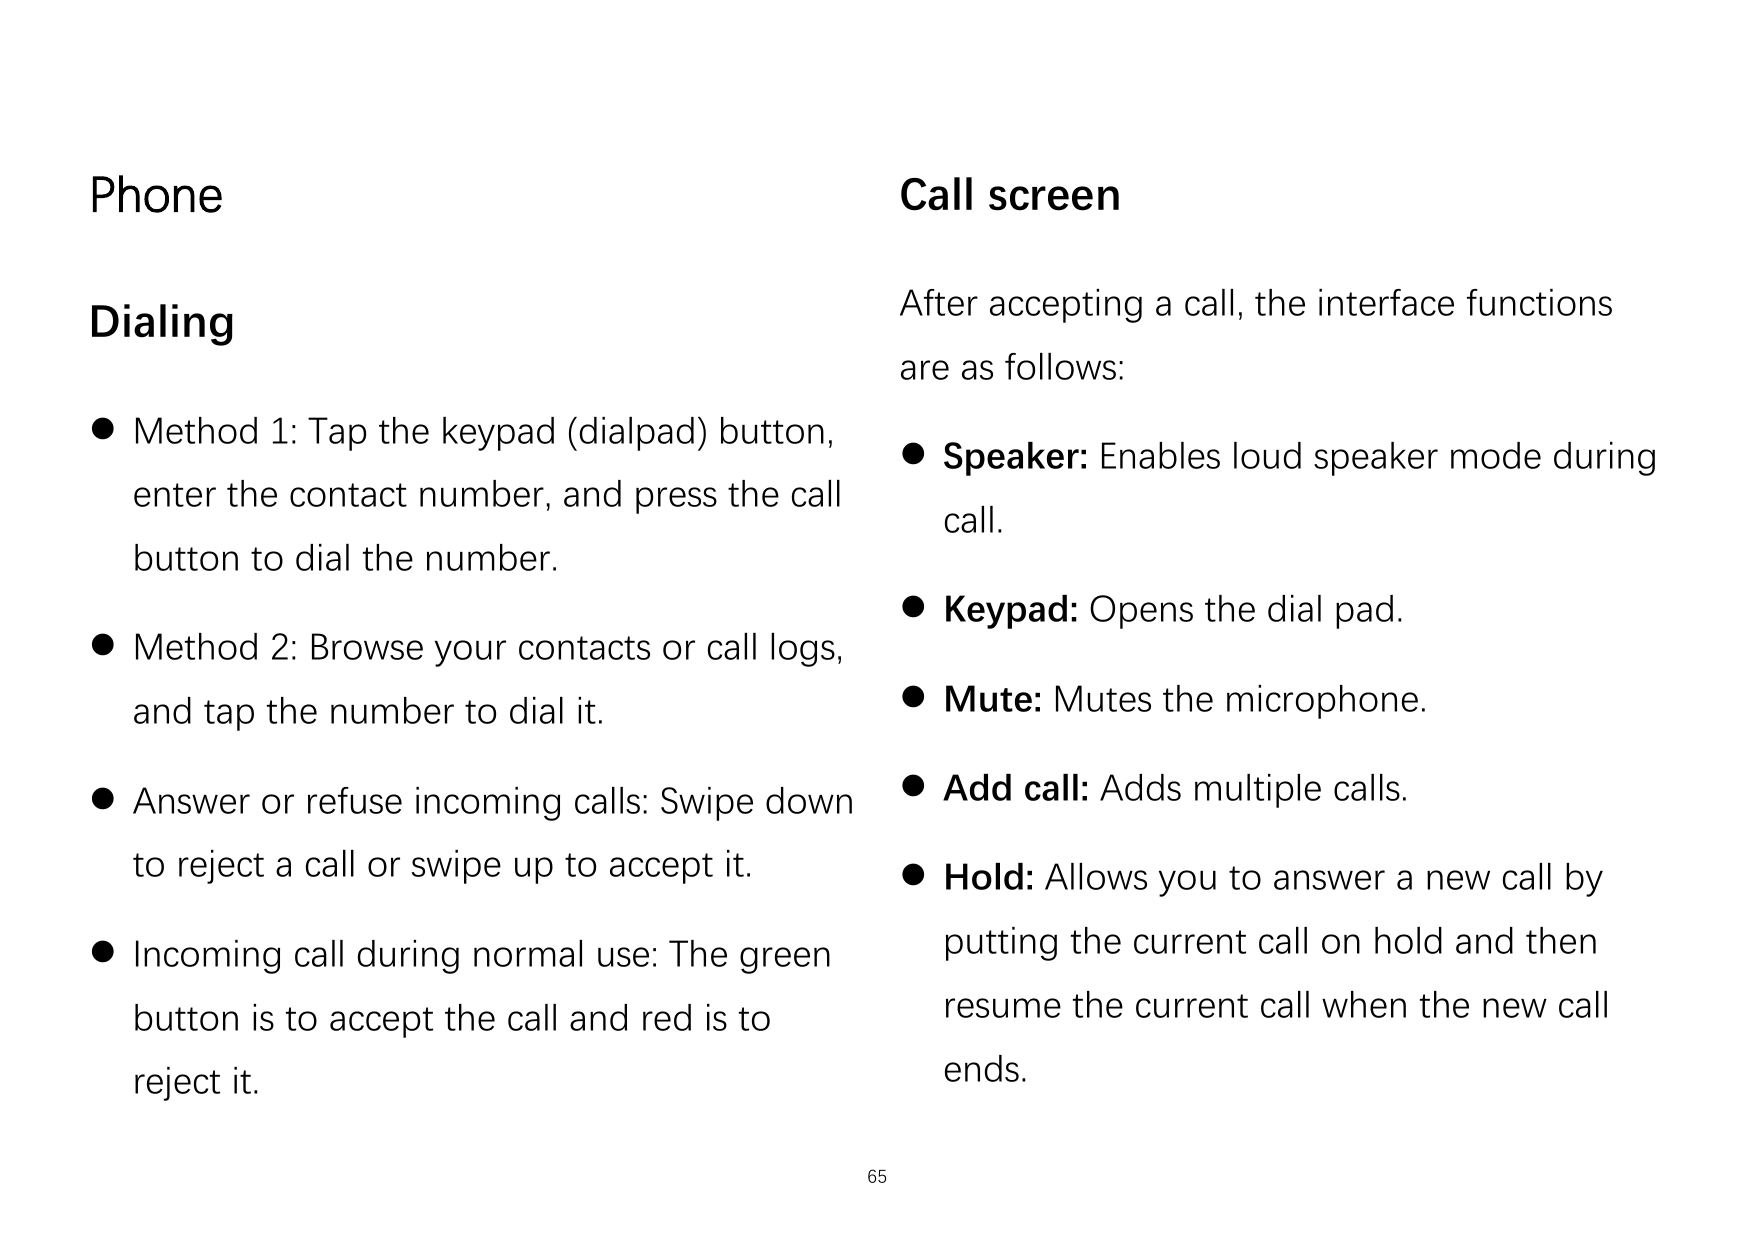 PhoneCall screenDialingAfter accepting a call, the interface functionsare as follows: Method 1: Tap the keypad (dialpad) button